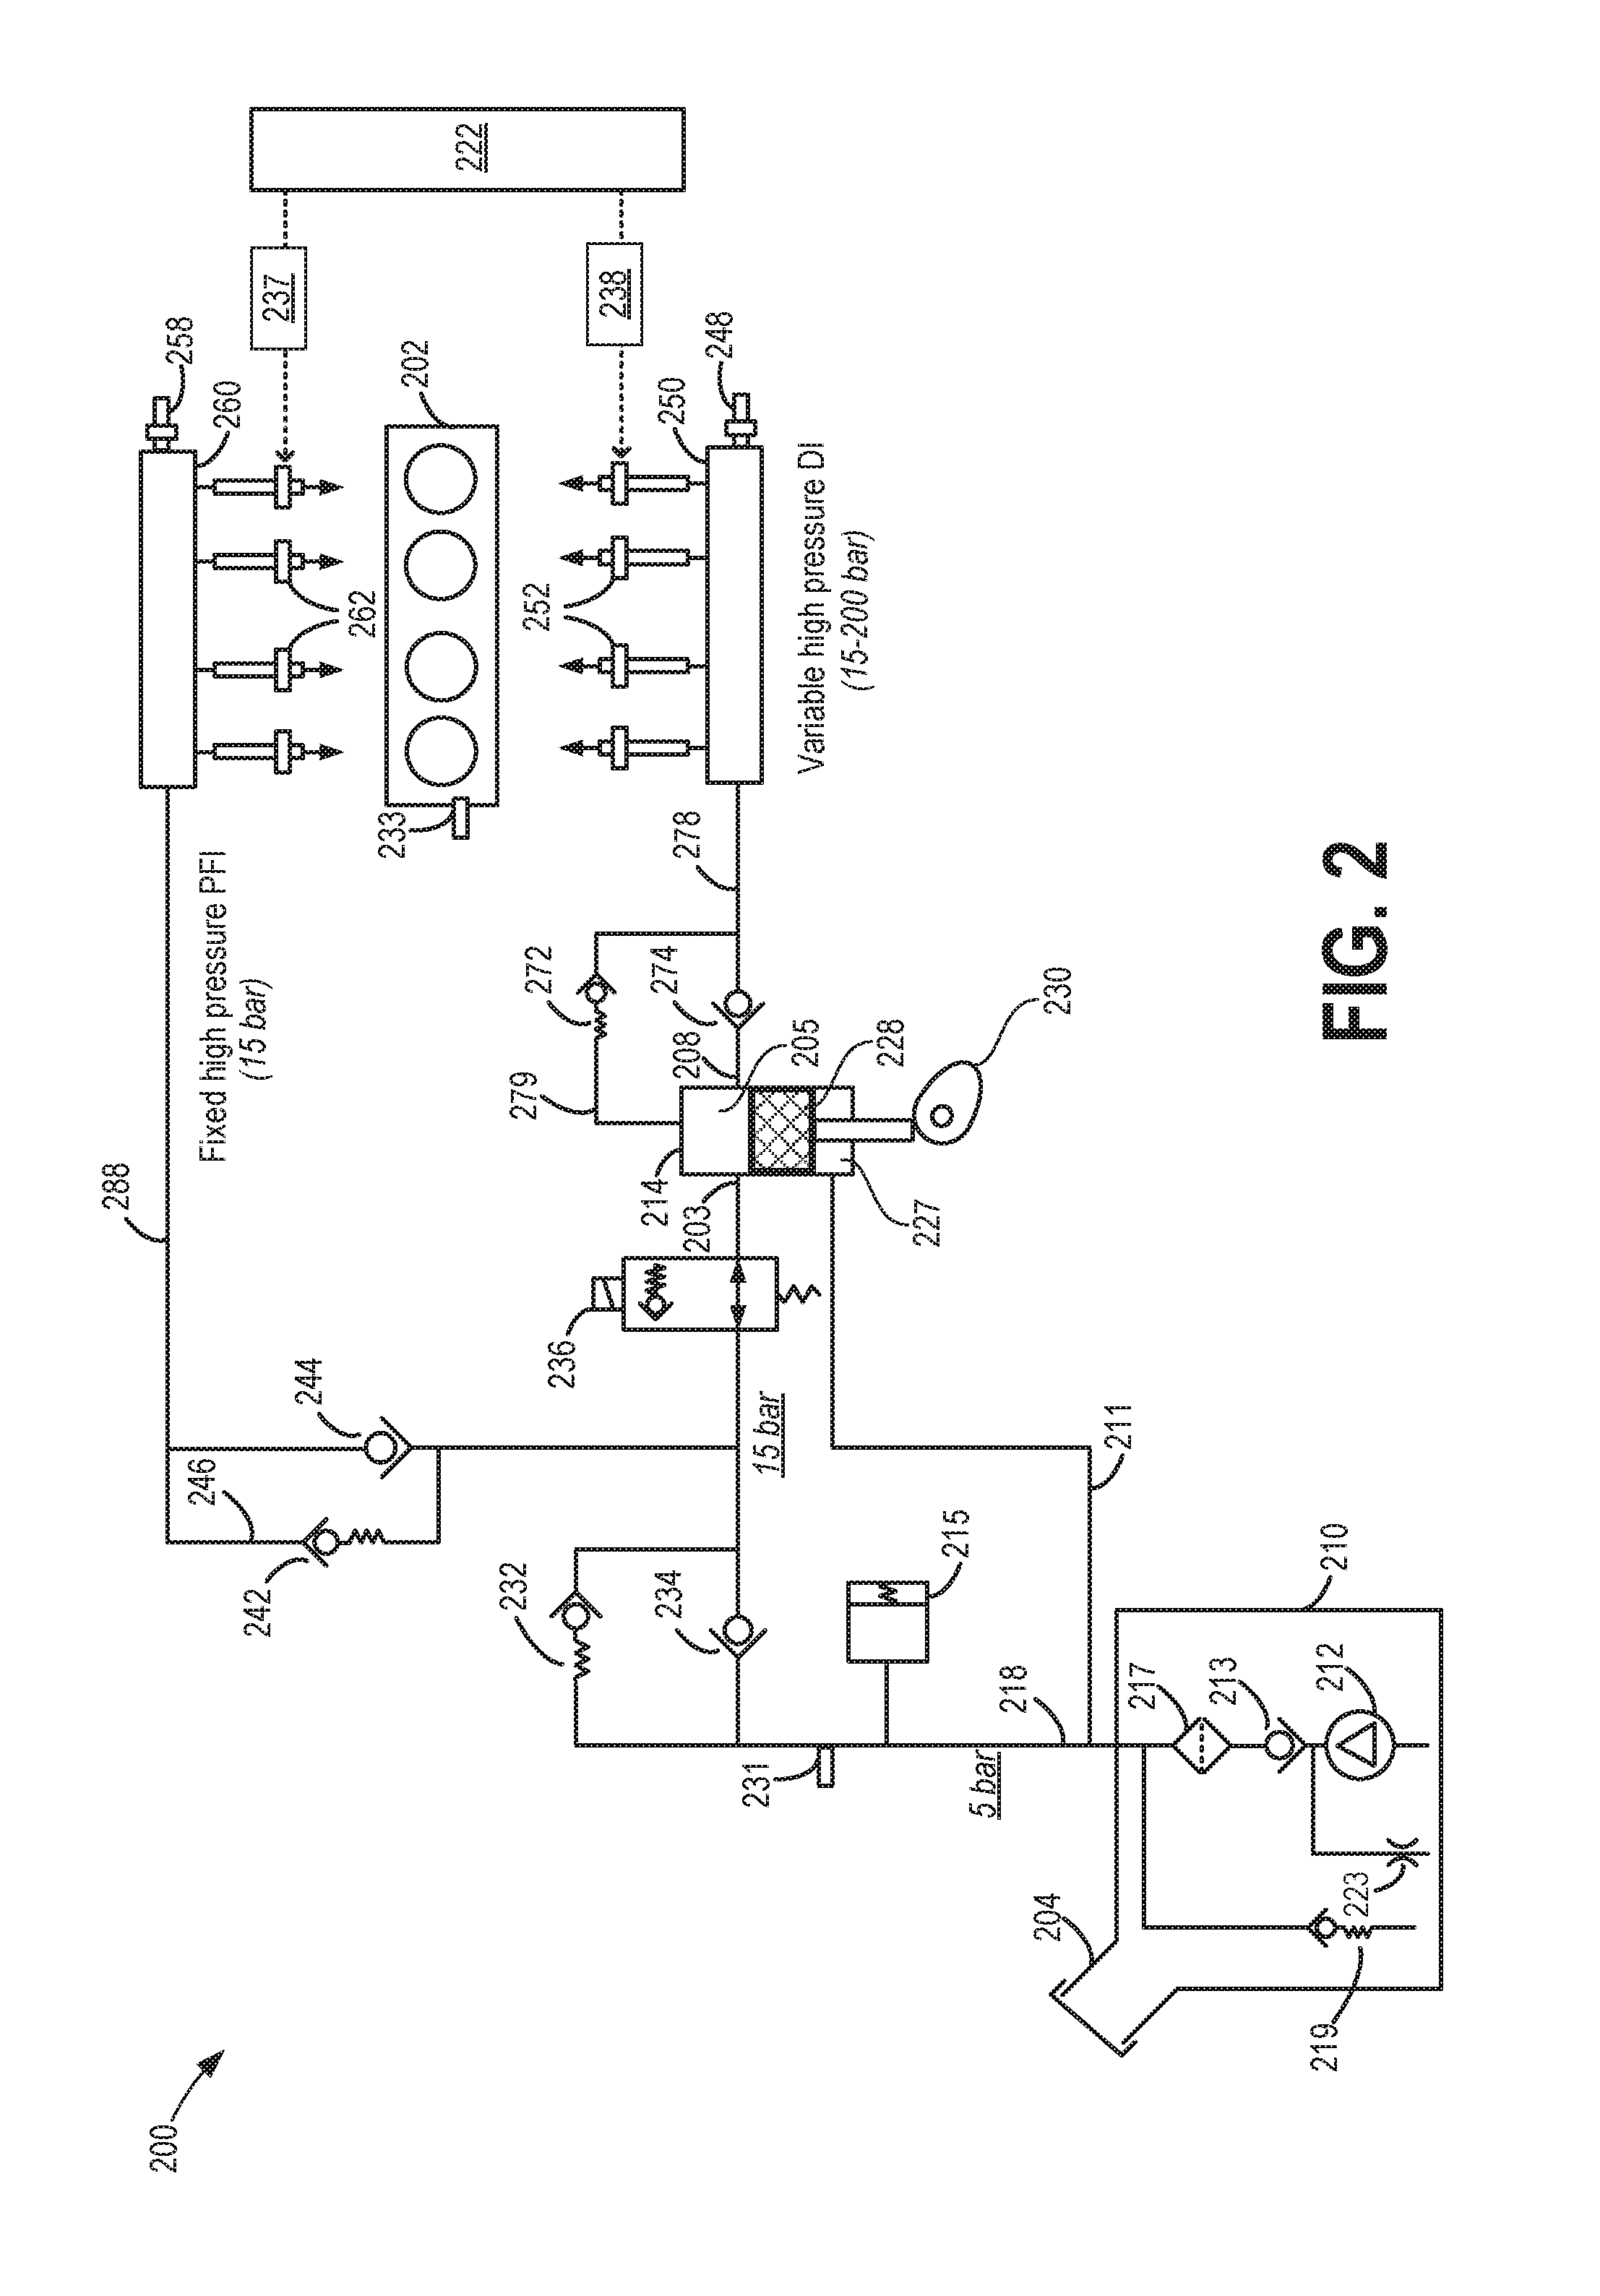 Methods and systems for port fuel injection control